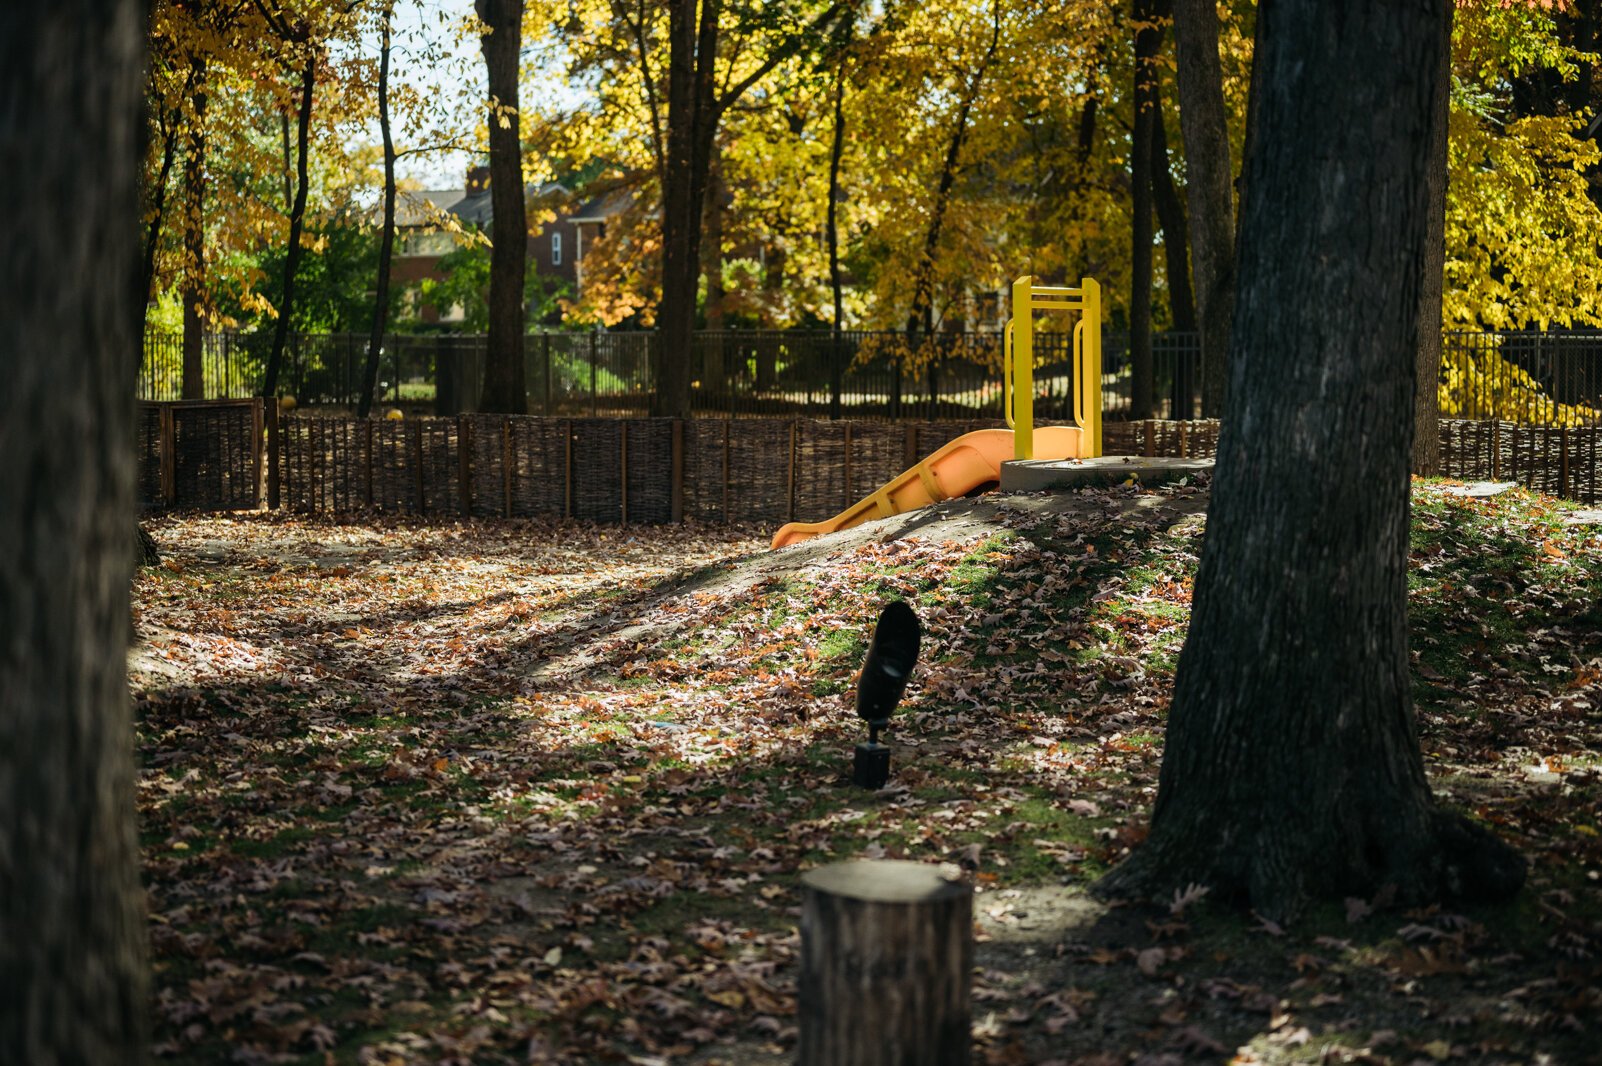 "The grove" is the center's largest playground, situated within the surrounding neighborhood, where 3 to 4-year-olds play. Each of the older classrooms has door access to the nature park.